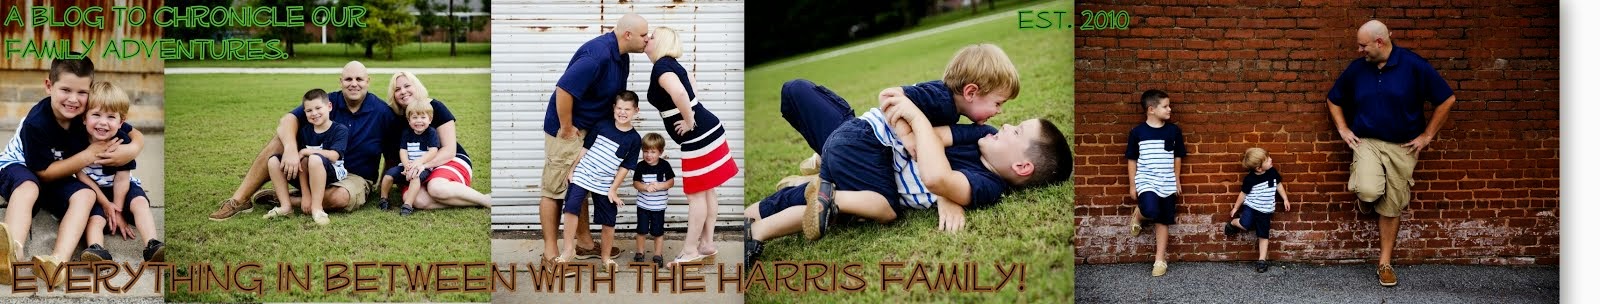 Everything in Between with the Harris Family!